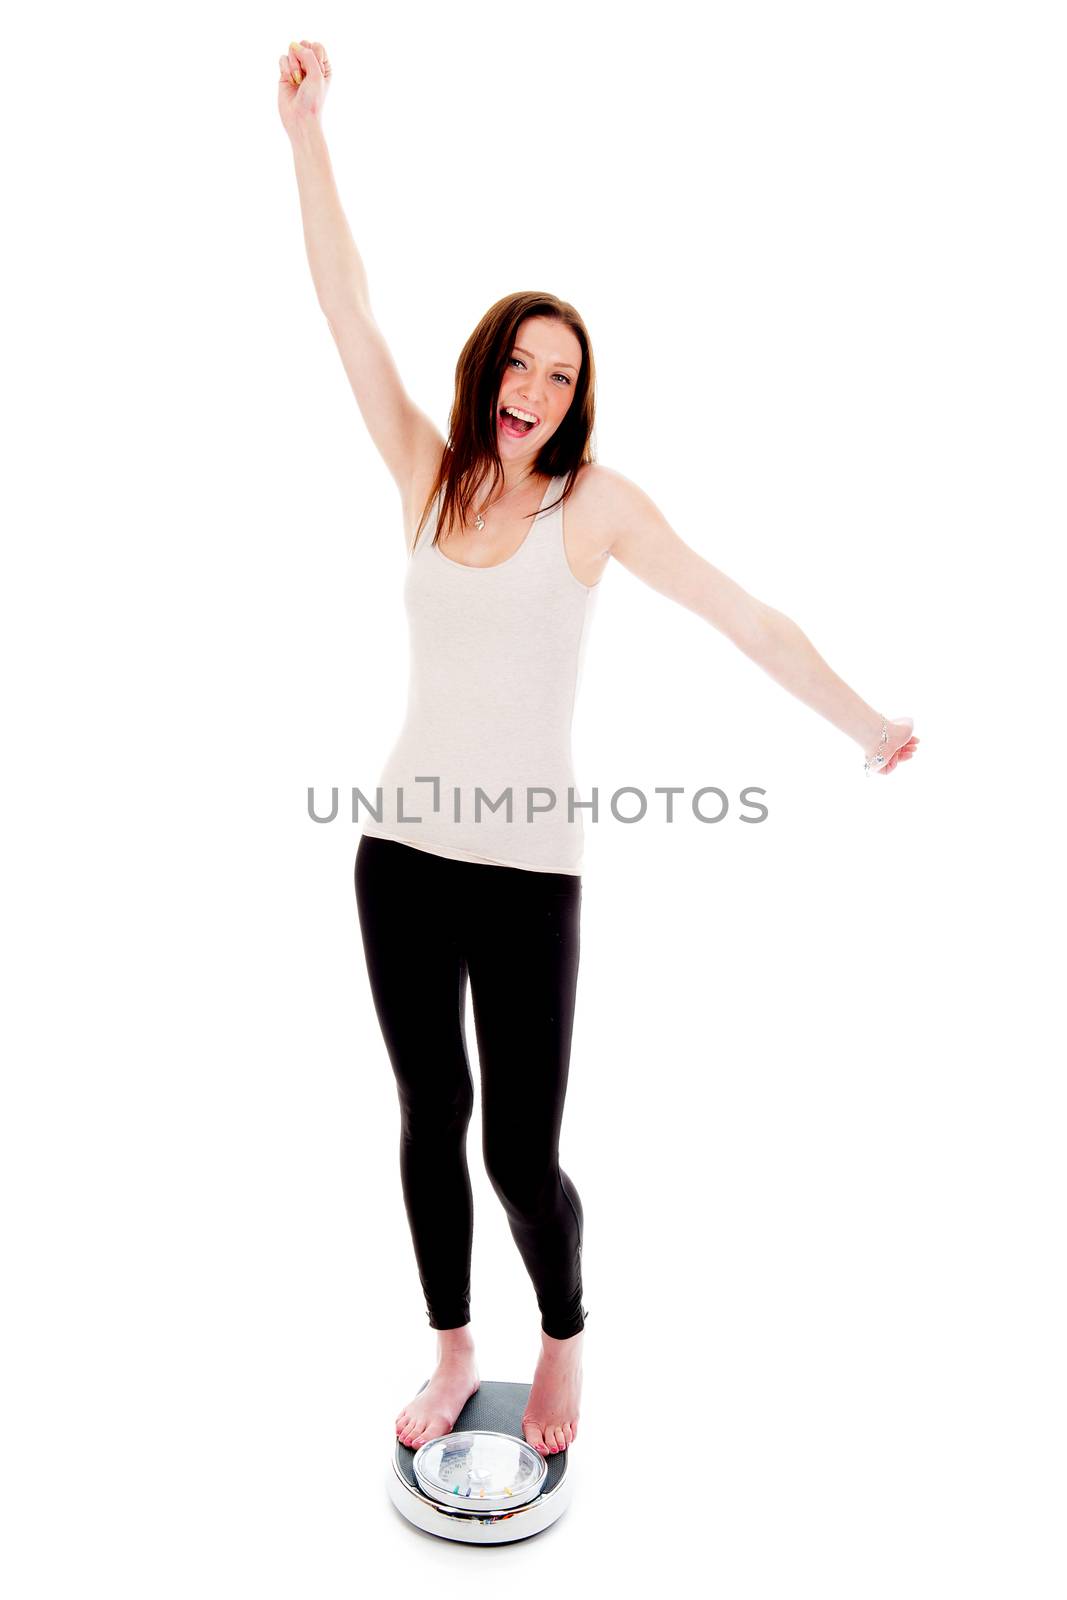 a girl on a weighing scale, celebrating her success of loosing weight